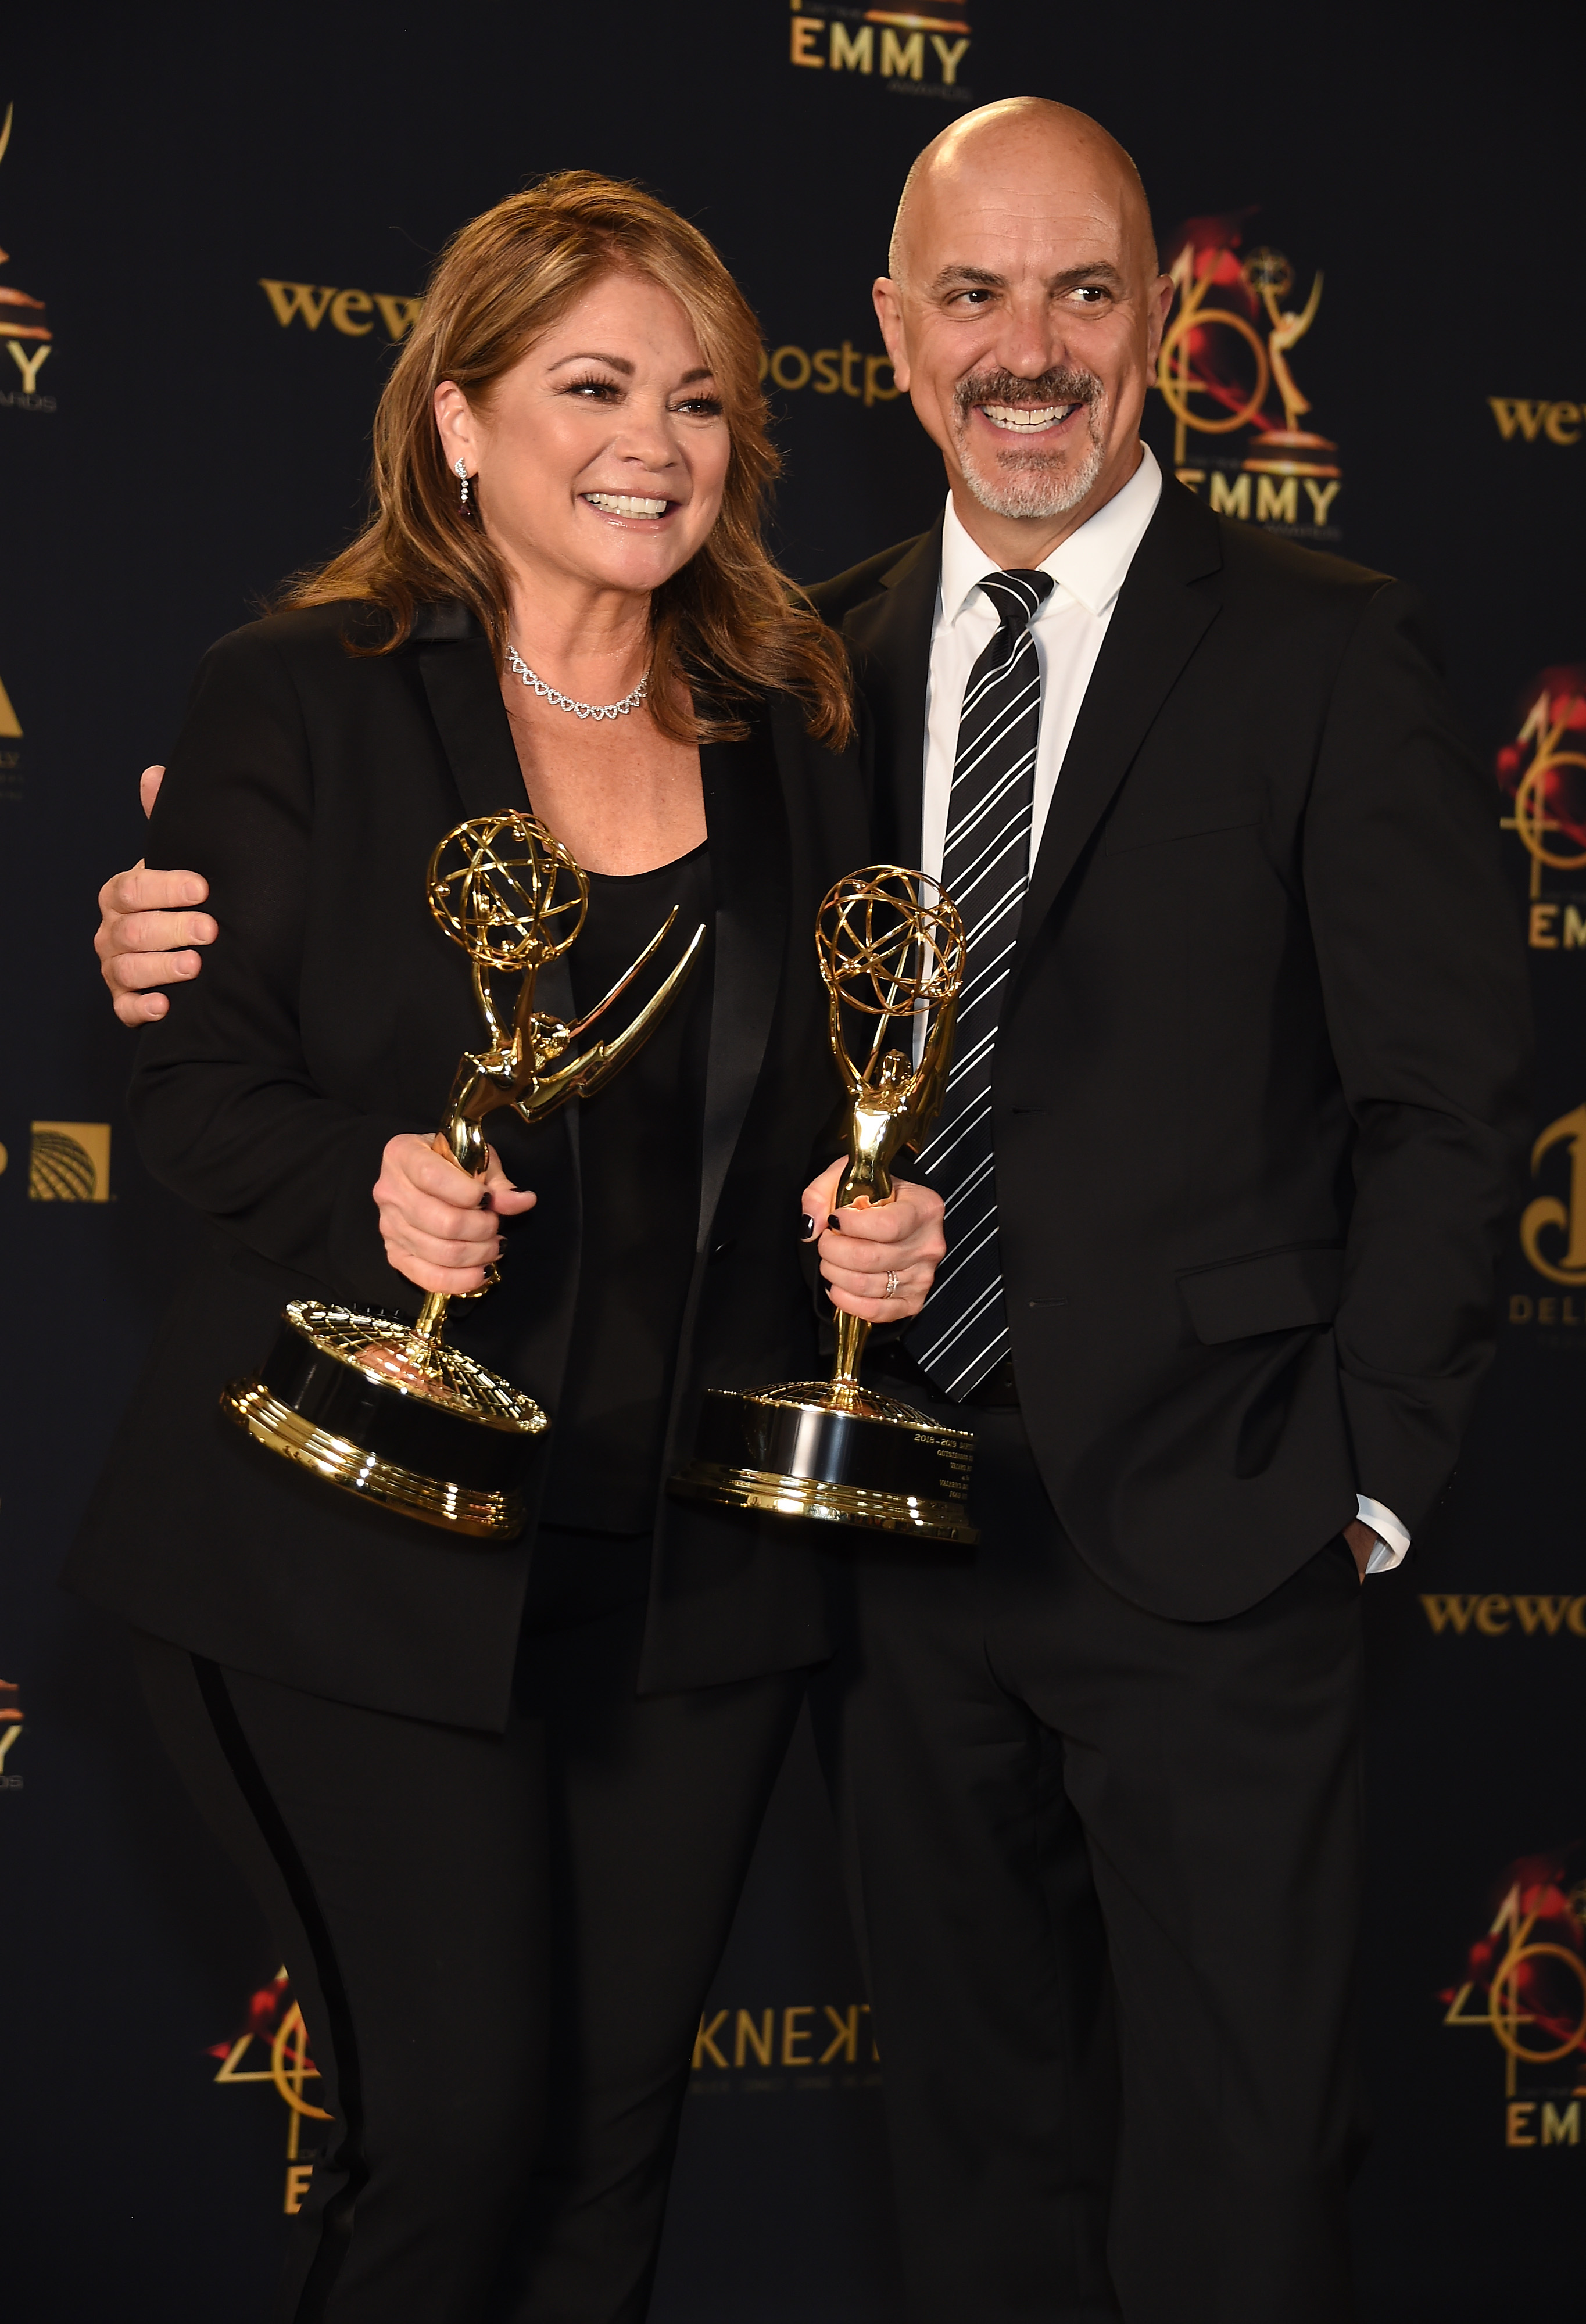 Valerie Bertinelli and Tom Vitale at the 46th Annual Daytime Emmy Awards in Pasadena, California on May 5, 2019 | Source: Getty Images